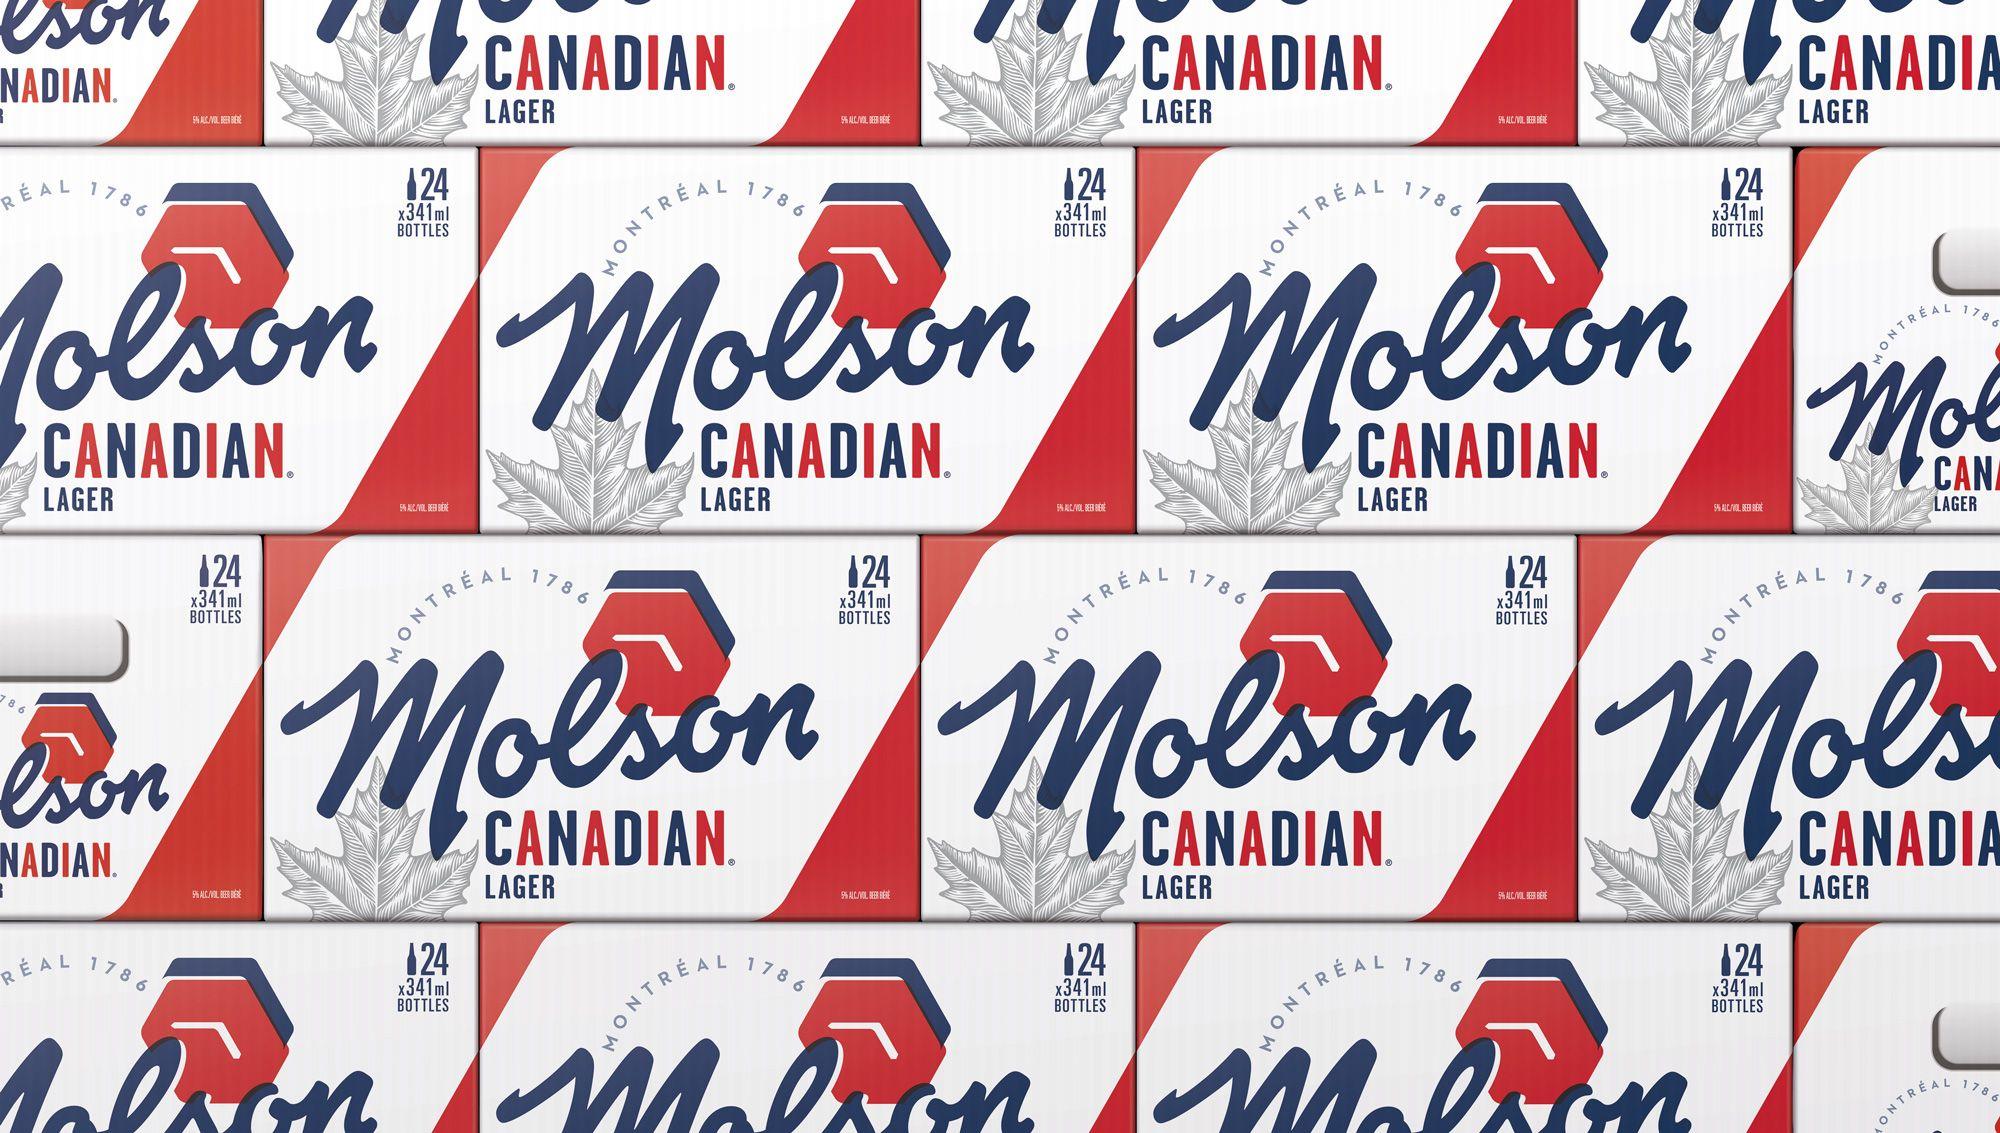 Molson Logo - Brand New: New Logo and Packaging for Molson Brands